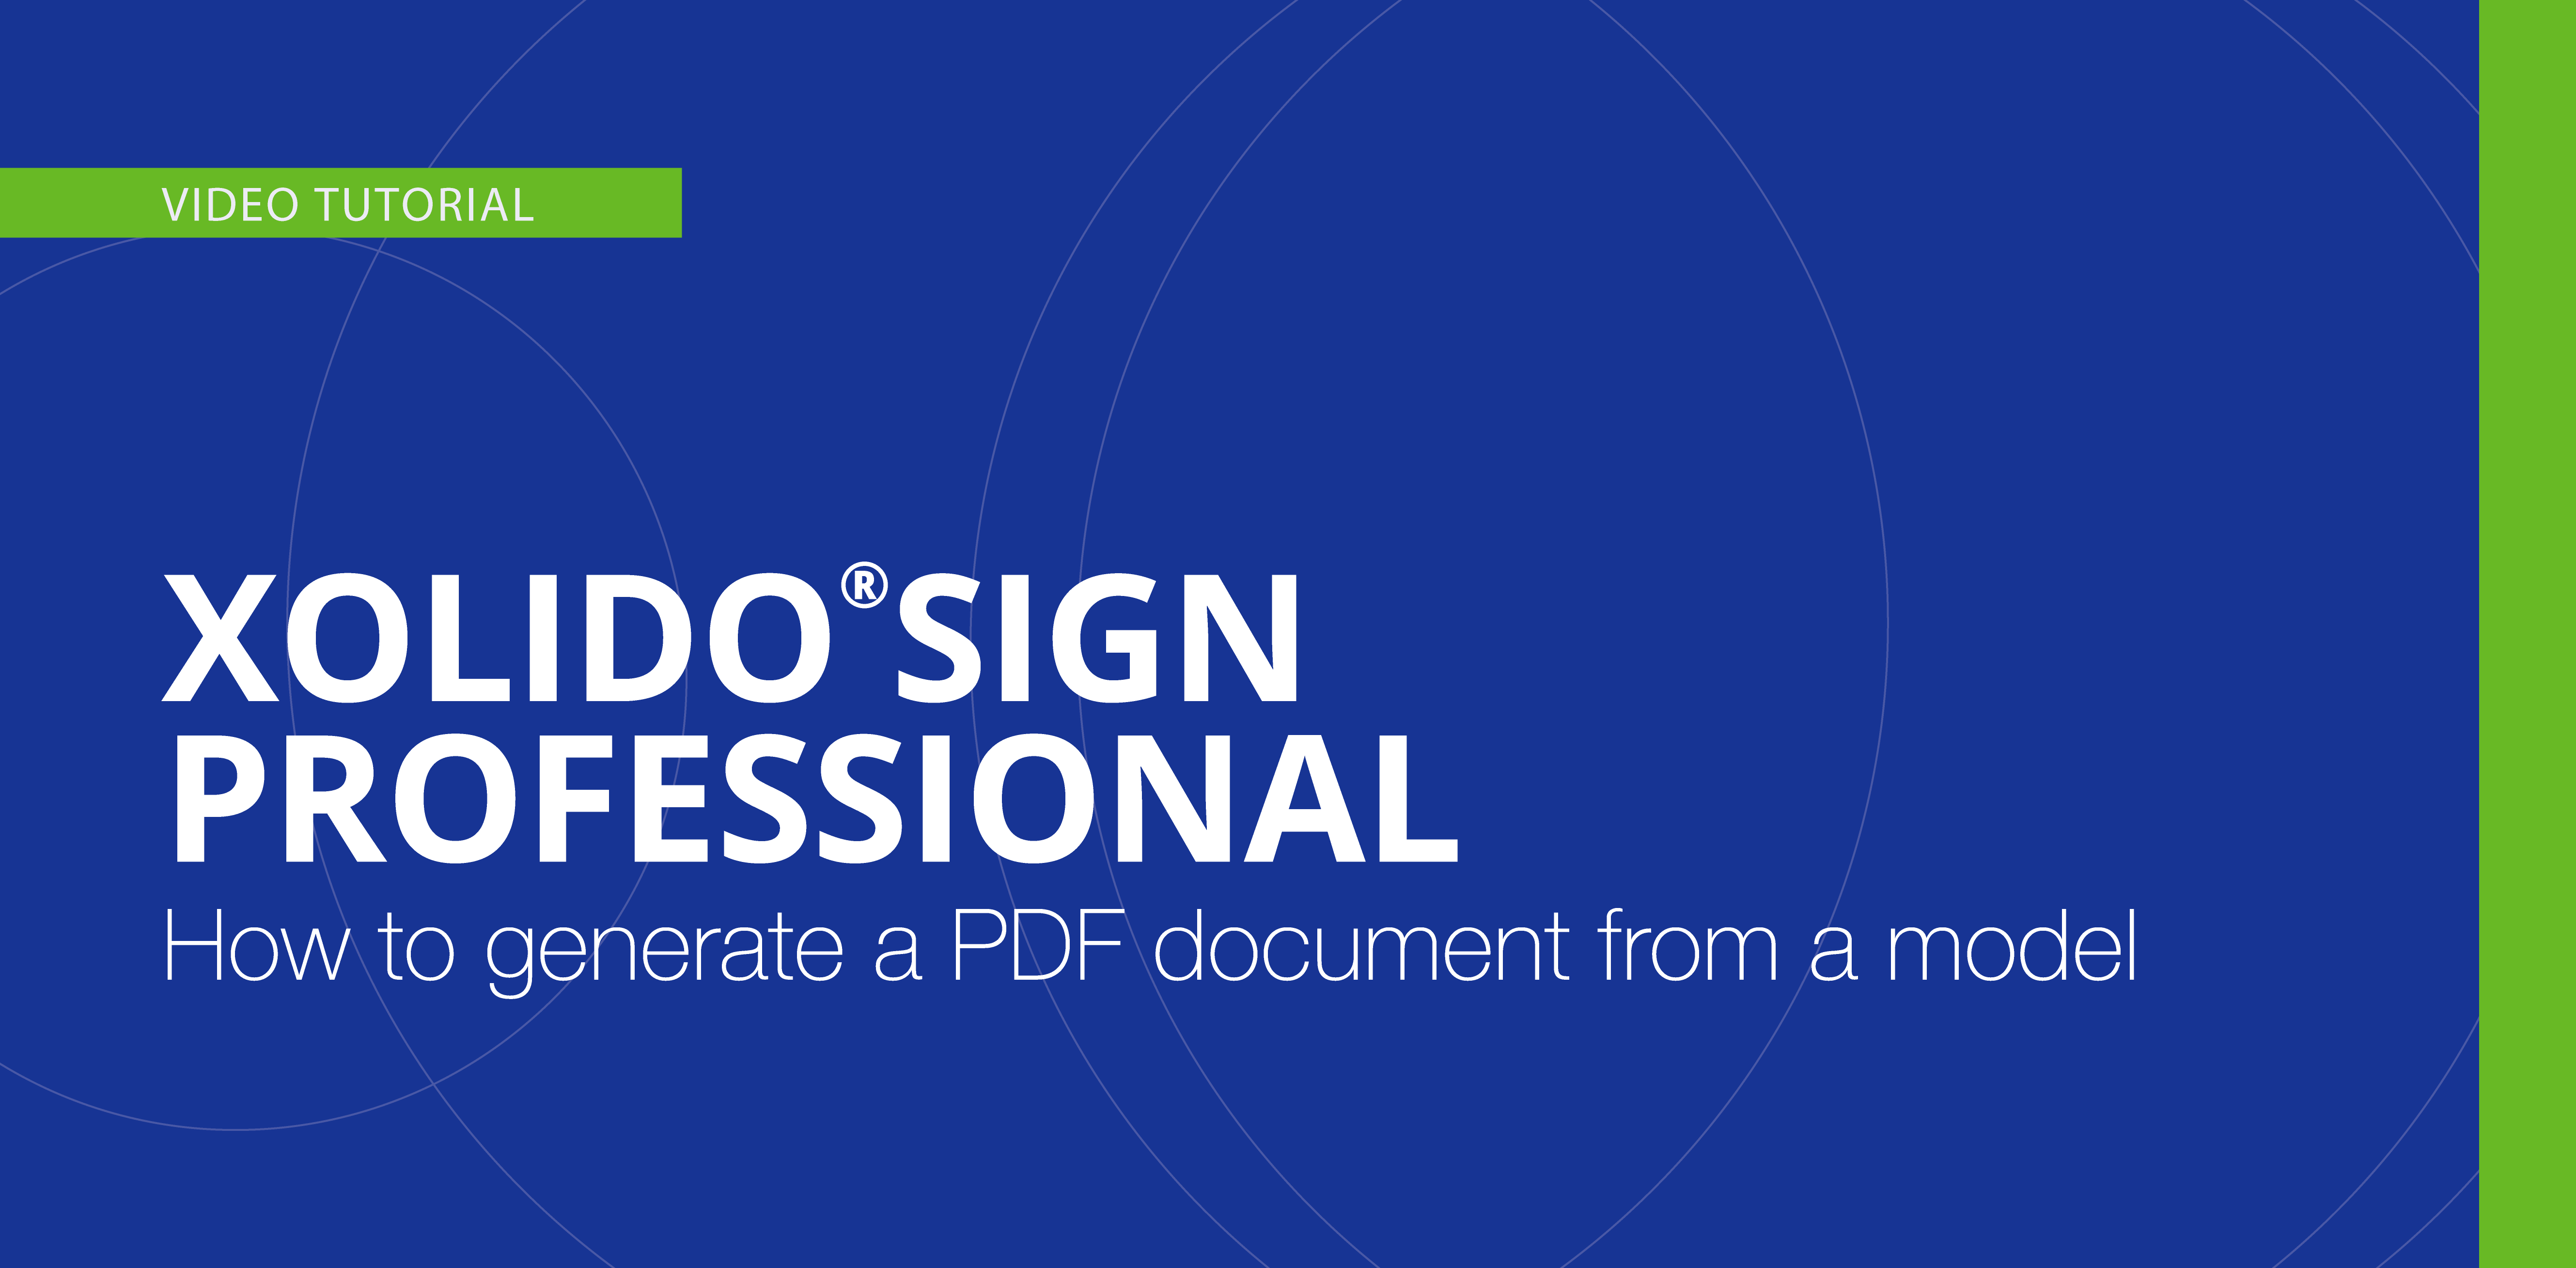 How to generate a PDF document from a model